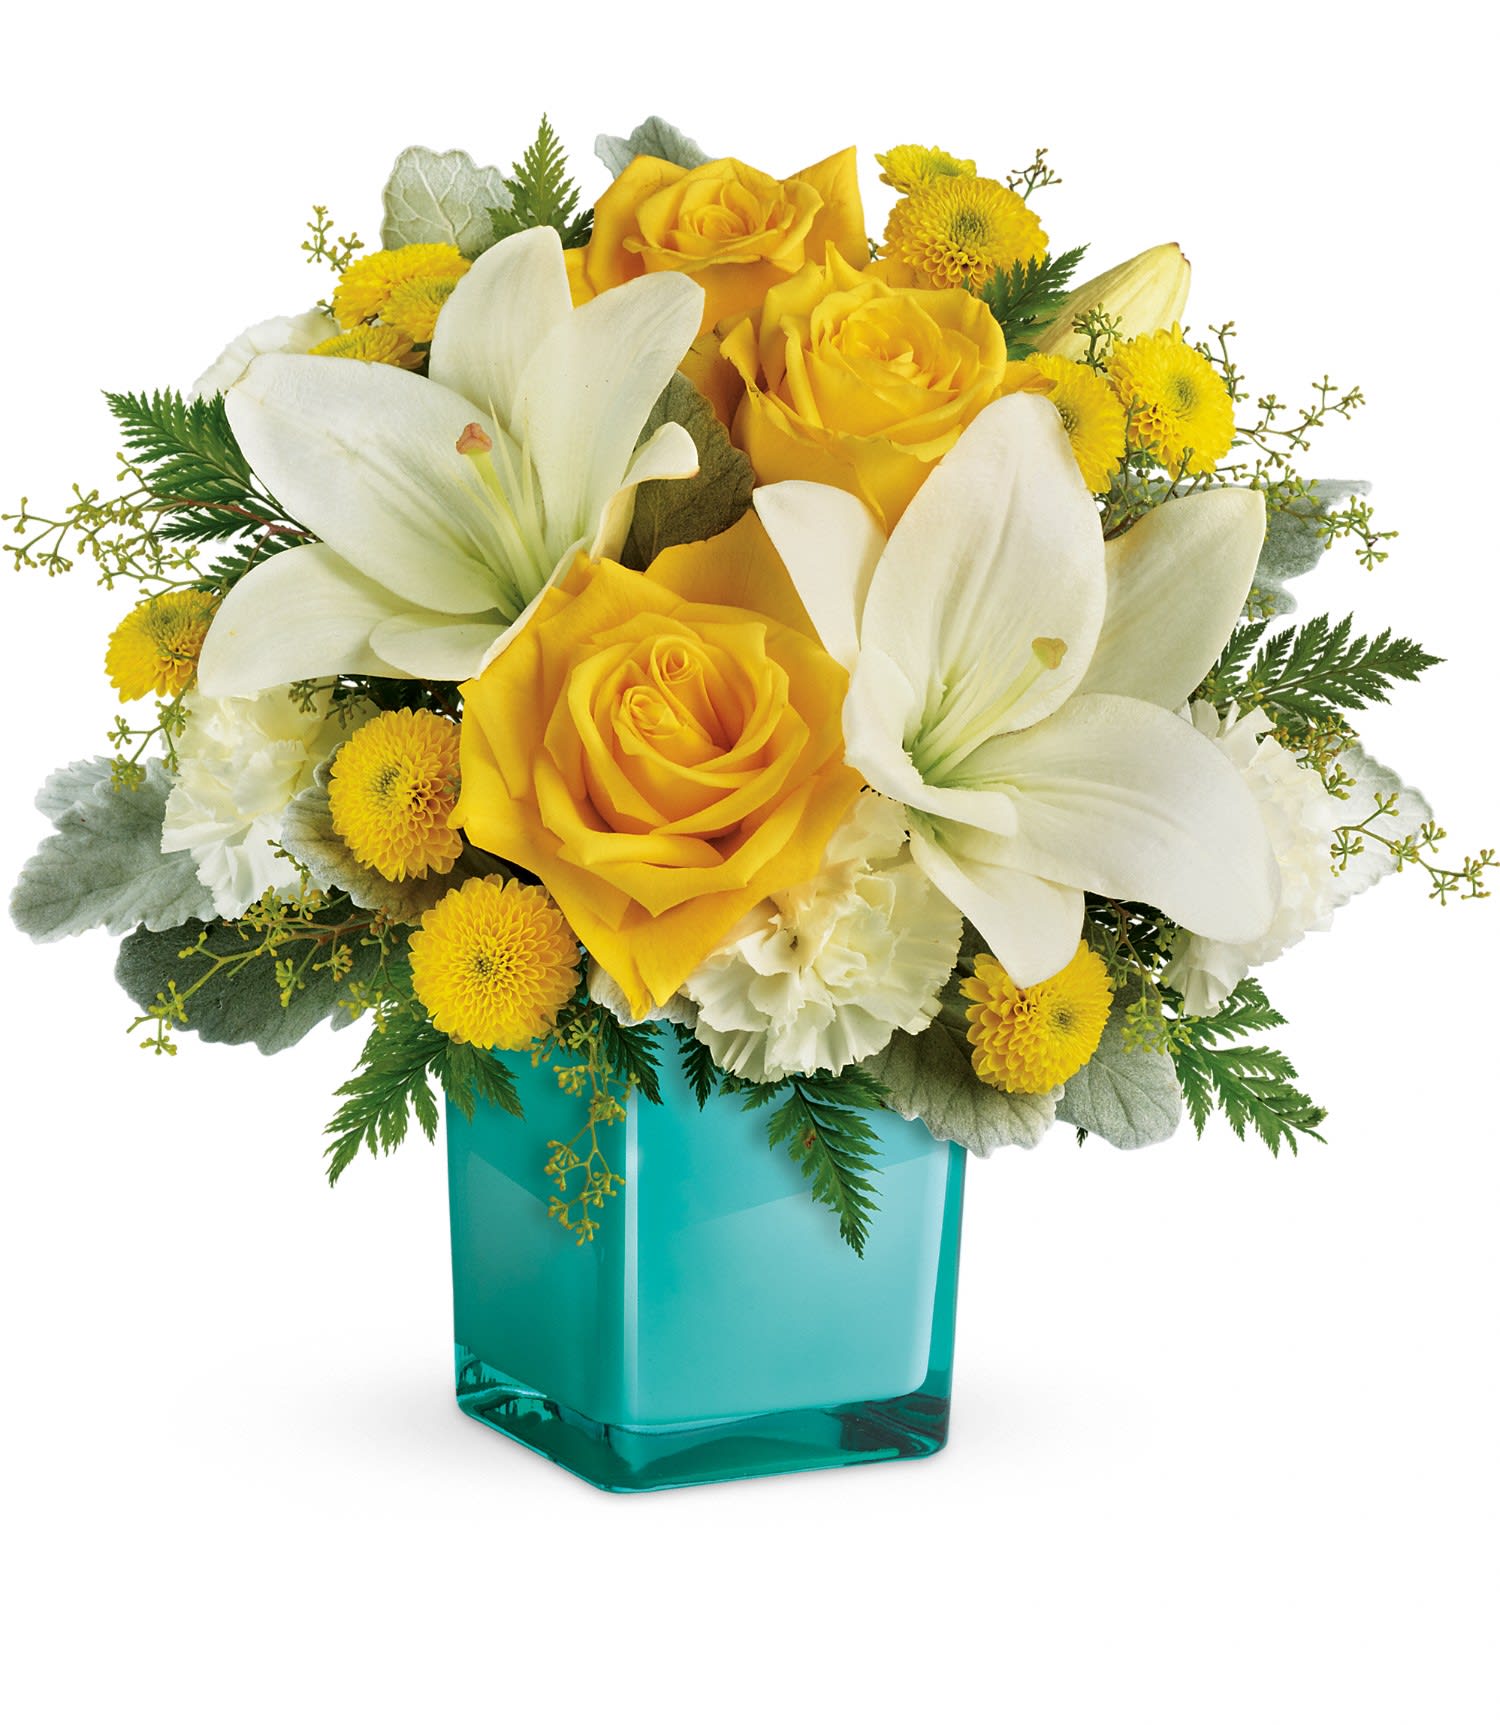 Golden Laughter Bouquet by Teleflora - This cheerful bouquet features yellow roses, white asiatic lilies, white carnations, yellow button spray chrysanthemums, seeded eucalyptus, dusty miller and leatherleaf fern. Delivered in a glass cube. Approximately 14 3/4 W x 13 H